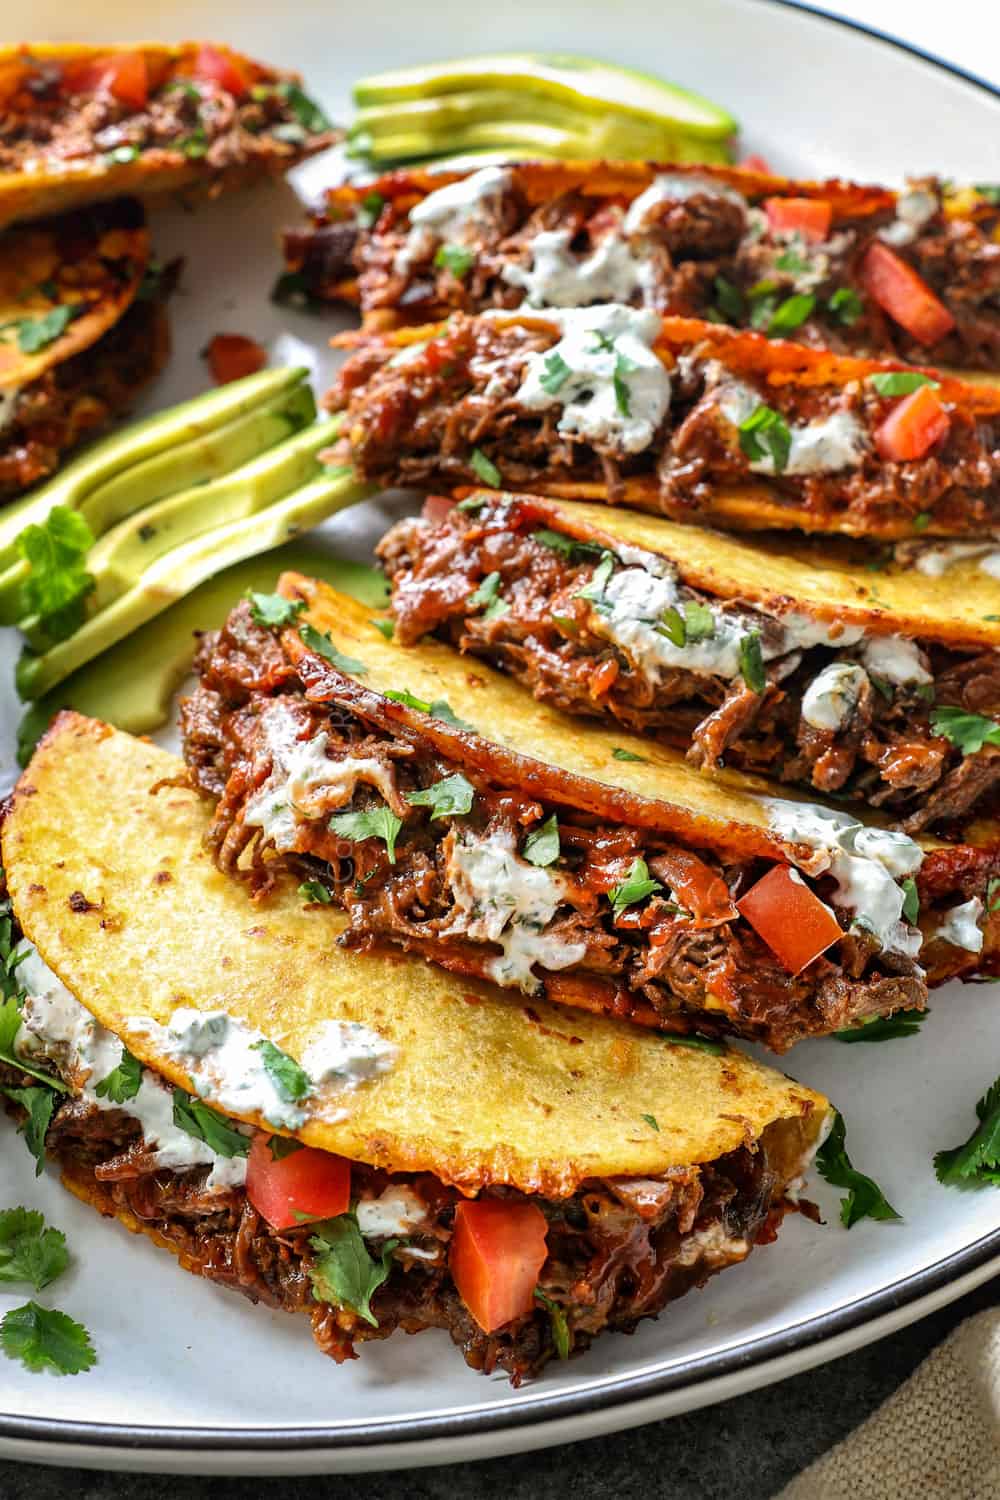 showing how to serve shredded beef tacos by topping with cilantro lime ranch and pic de gallo